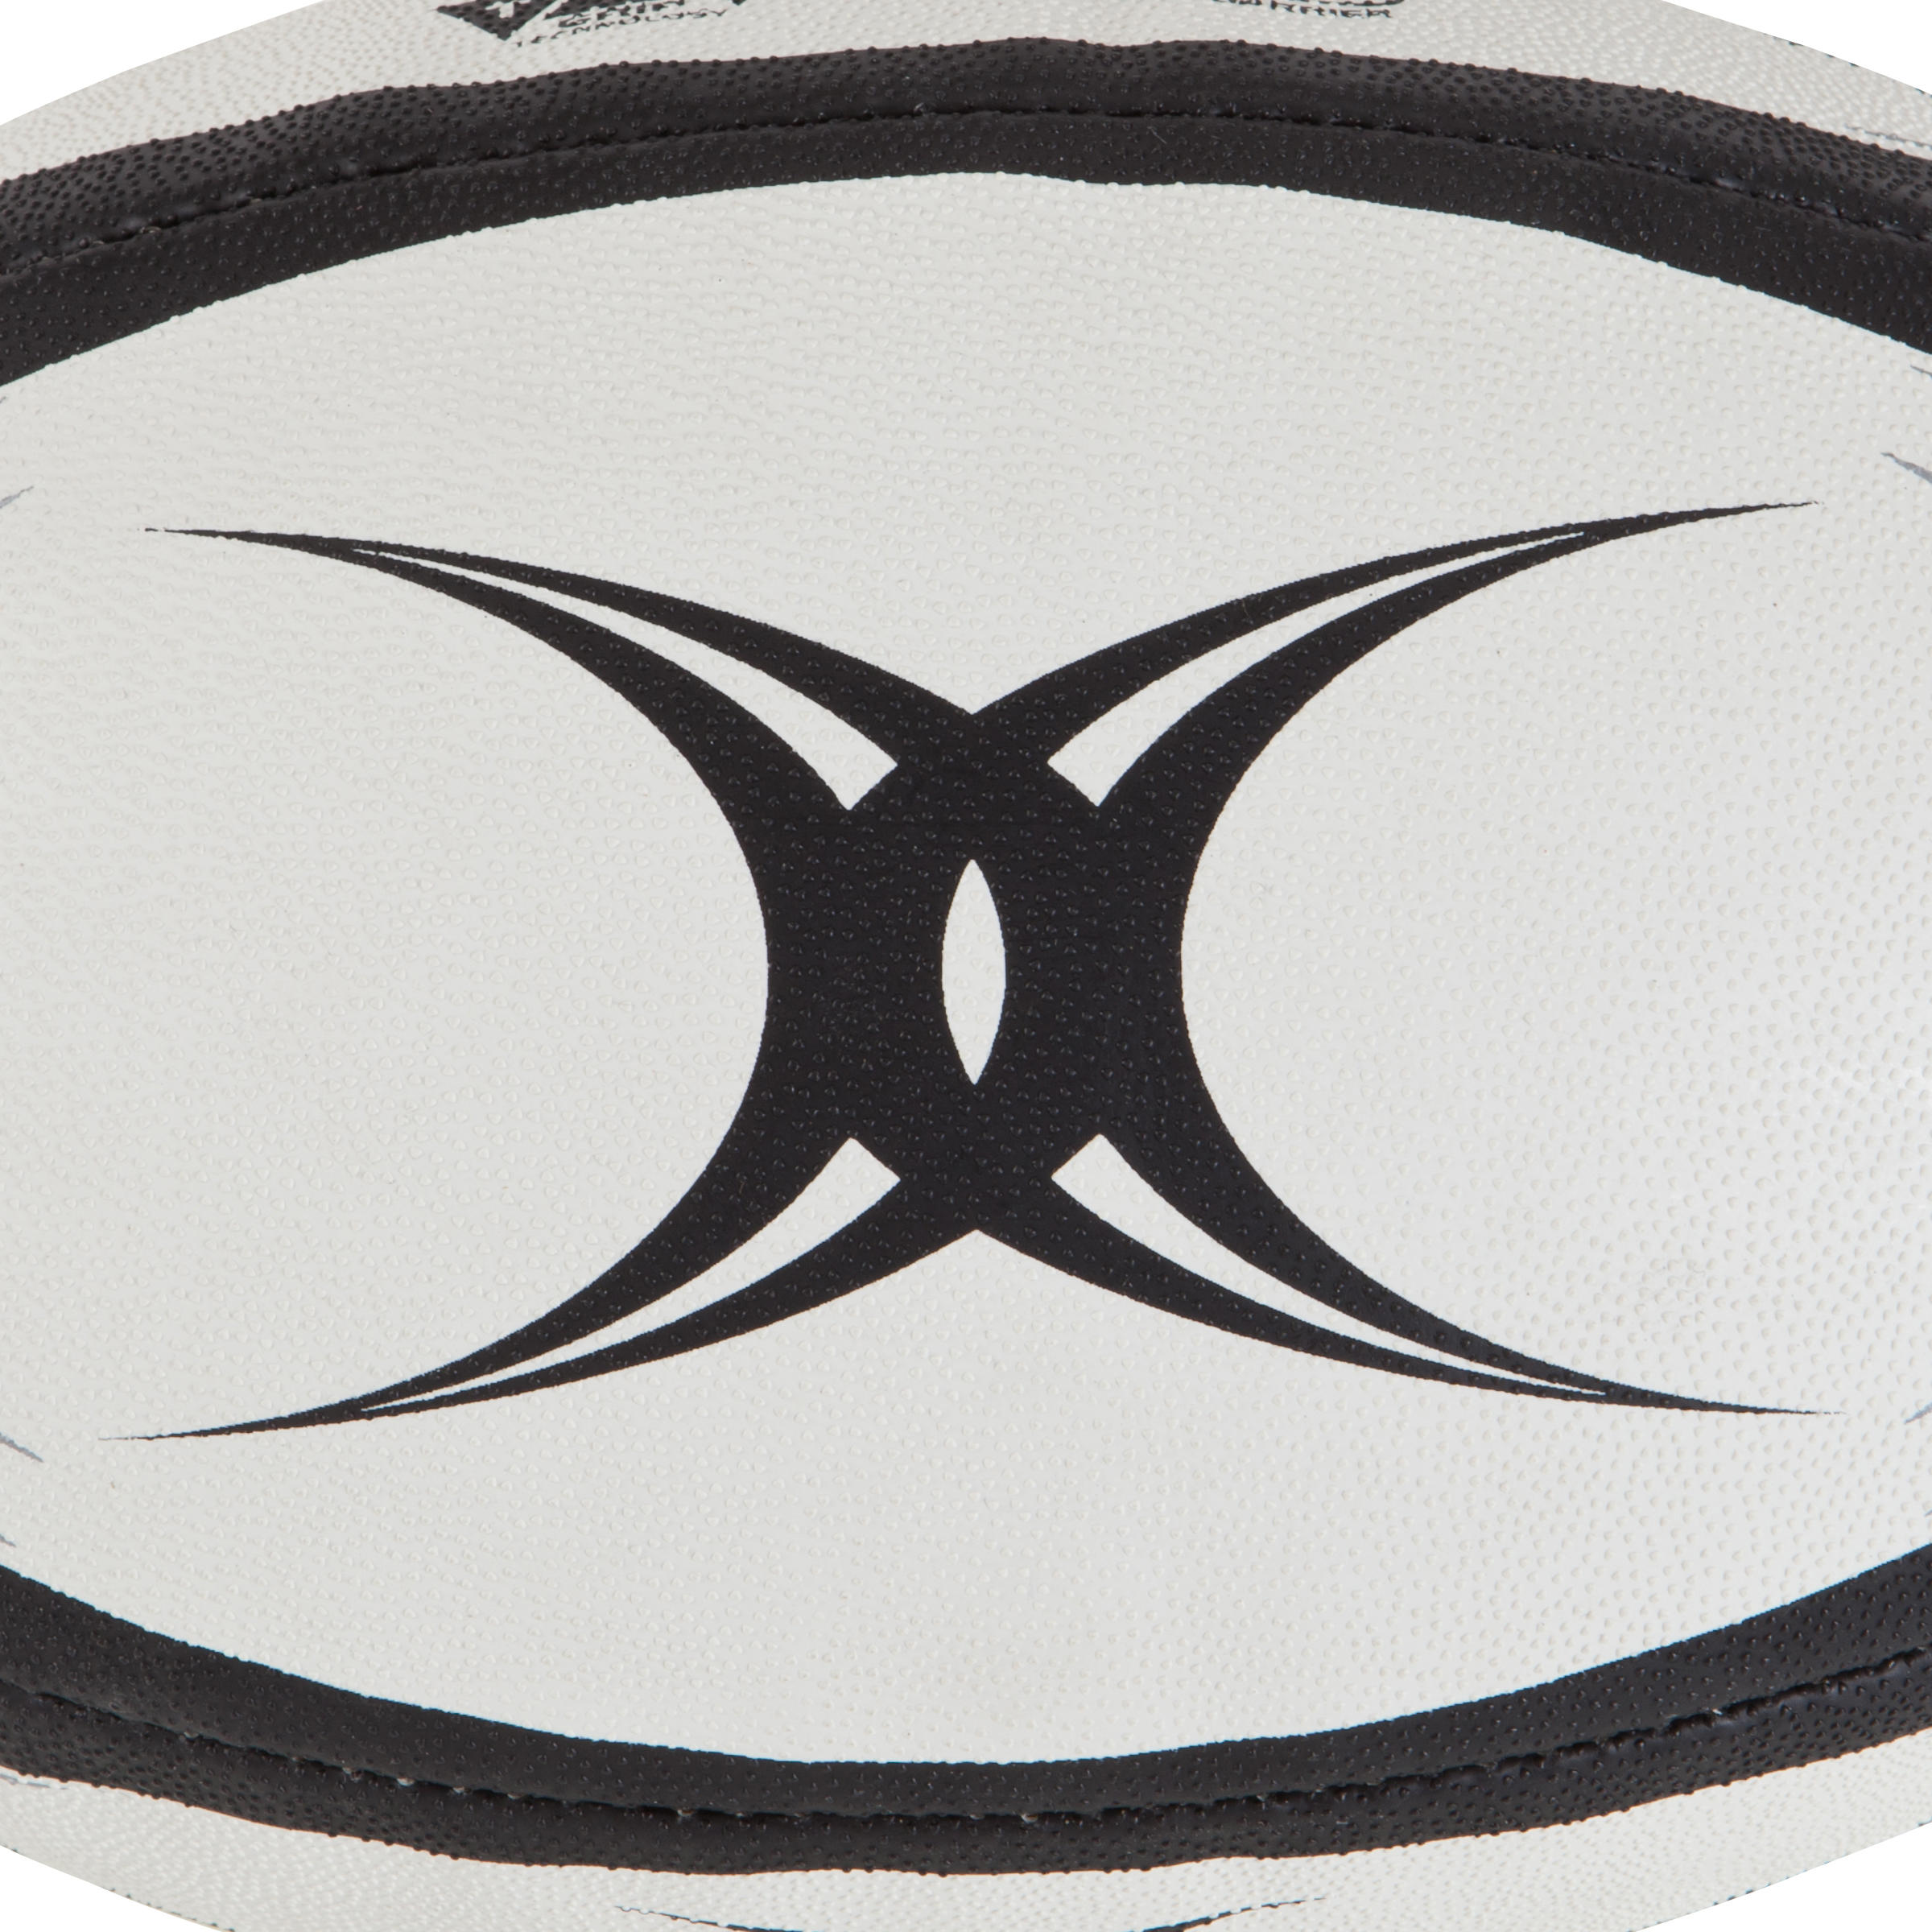 Rugby Ball Gtr4000 Size 5 - White/Black 5/9